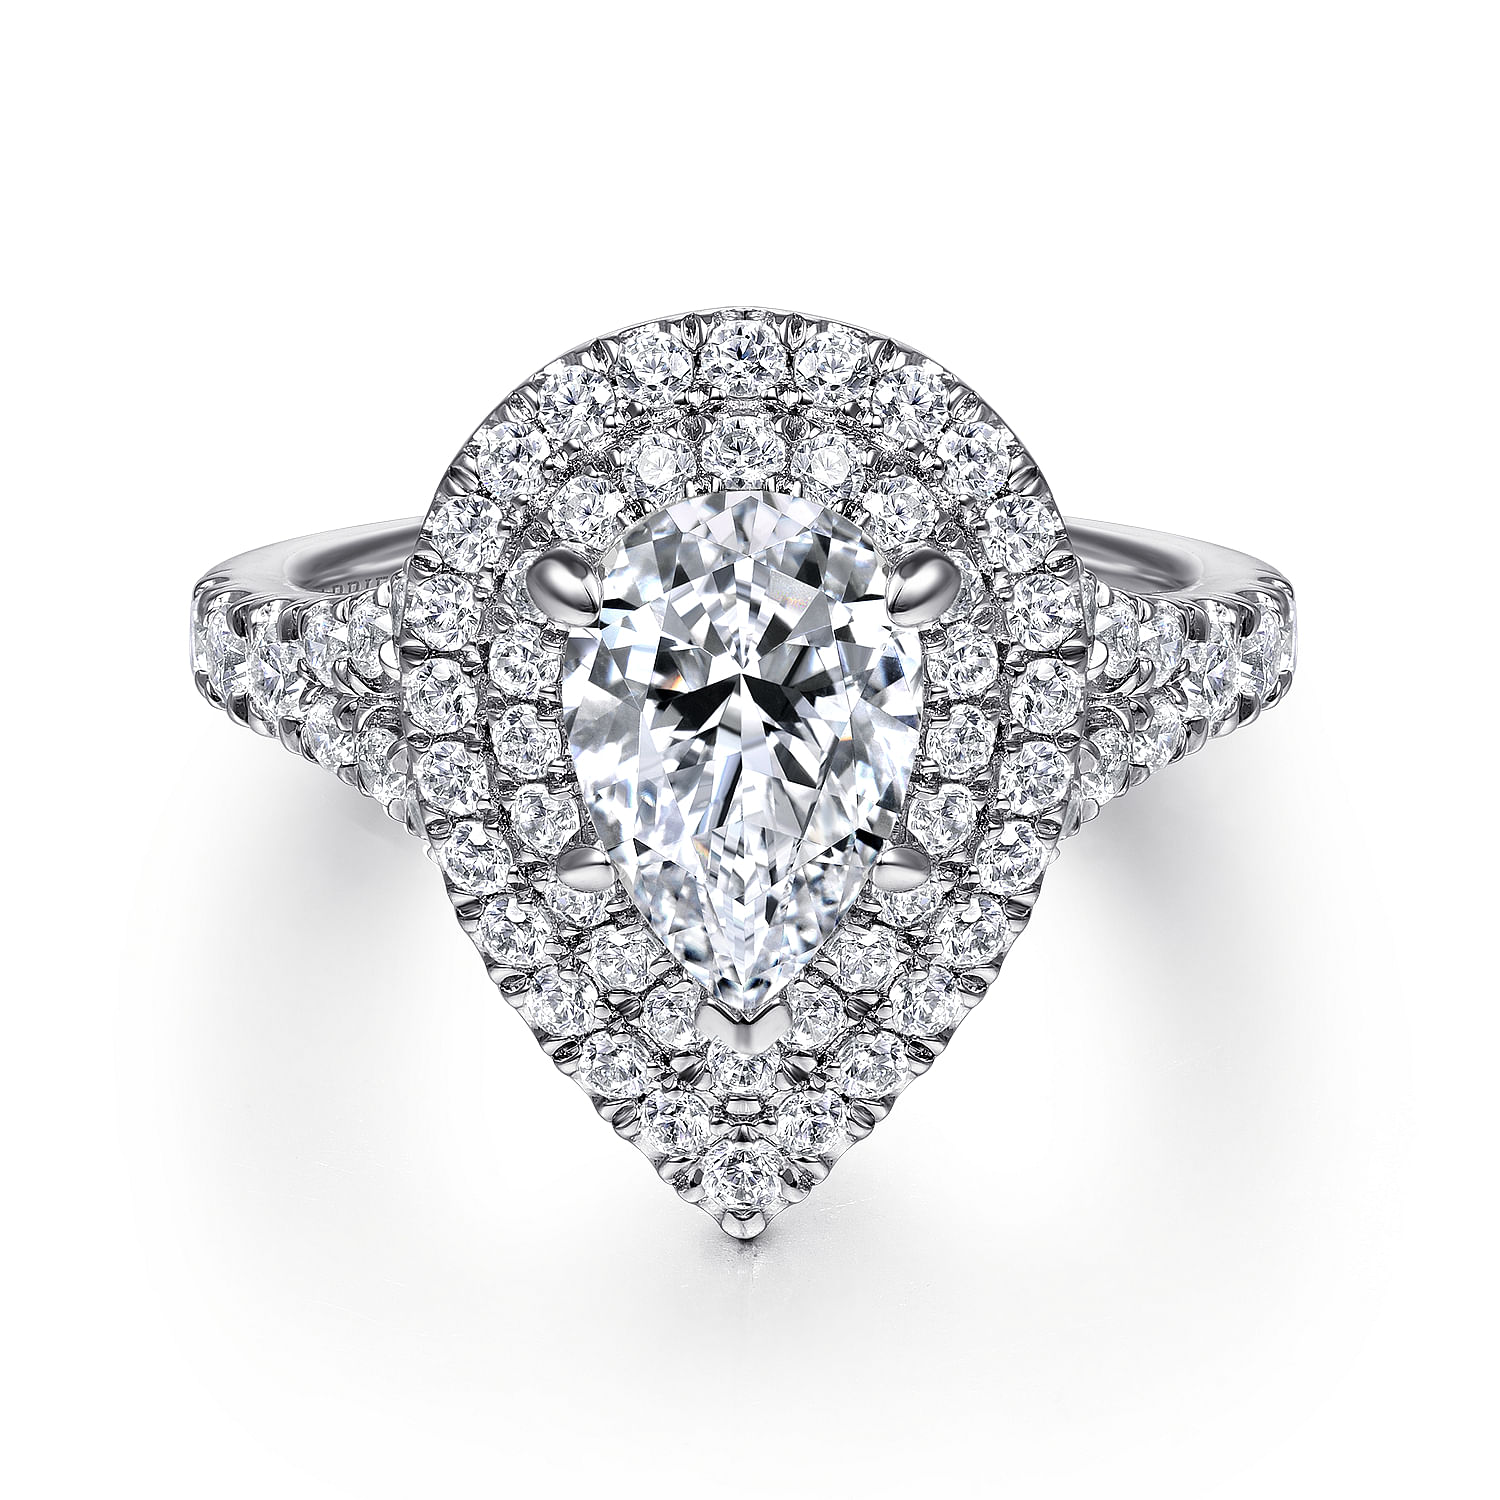 Lexie - 14K White Gold Pear Shaped Double Halo Diamond Engagement Ring